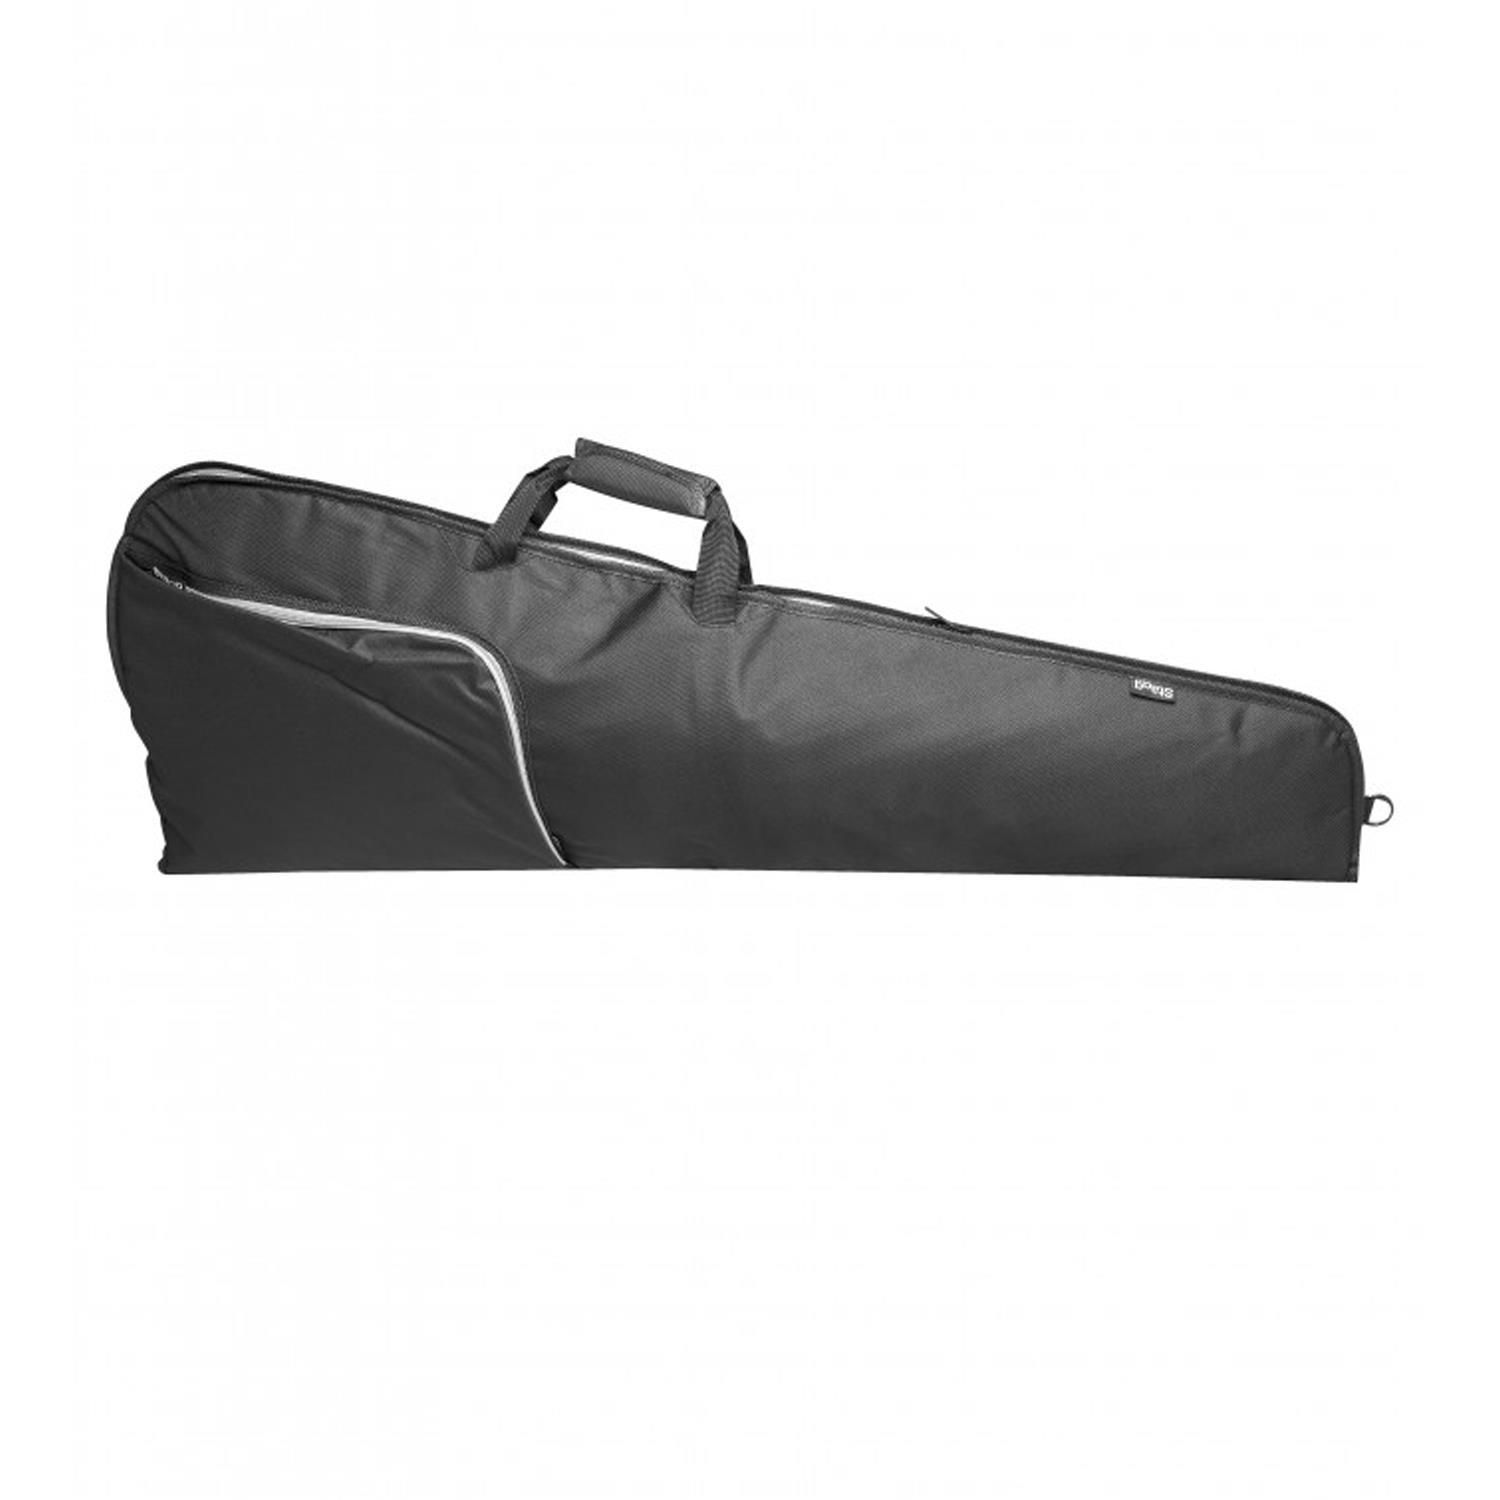 Stagg STB-10 TE Padded Bag for Electric Guitar Triangular Model - DY Pro Audio